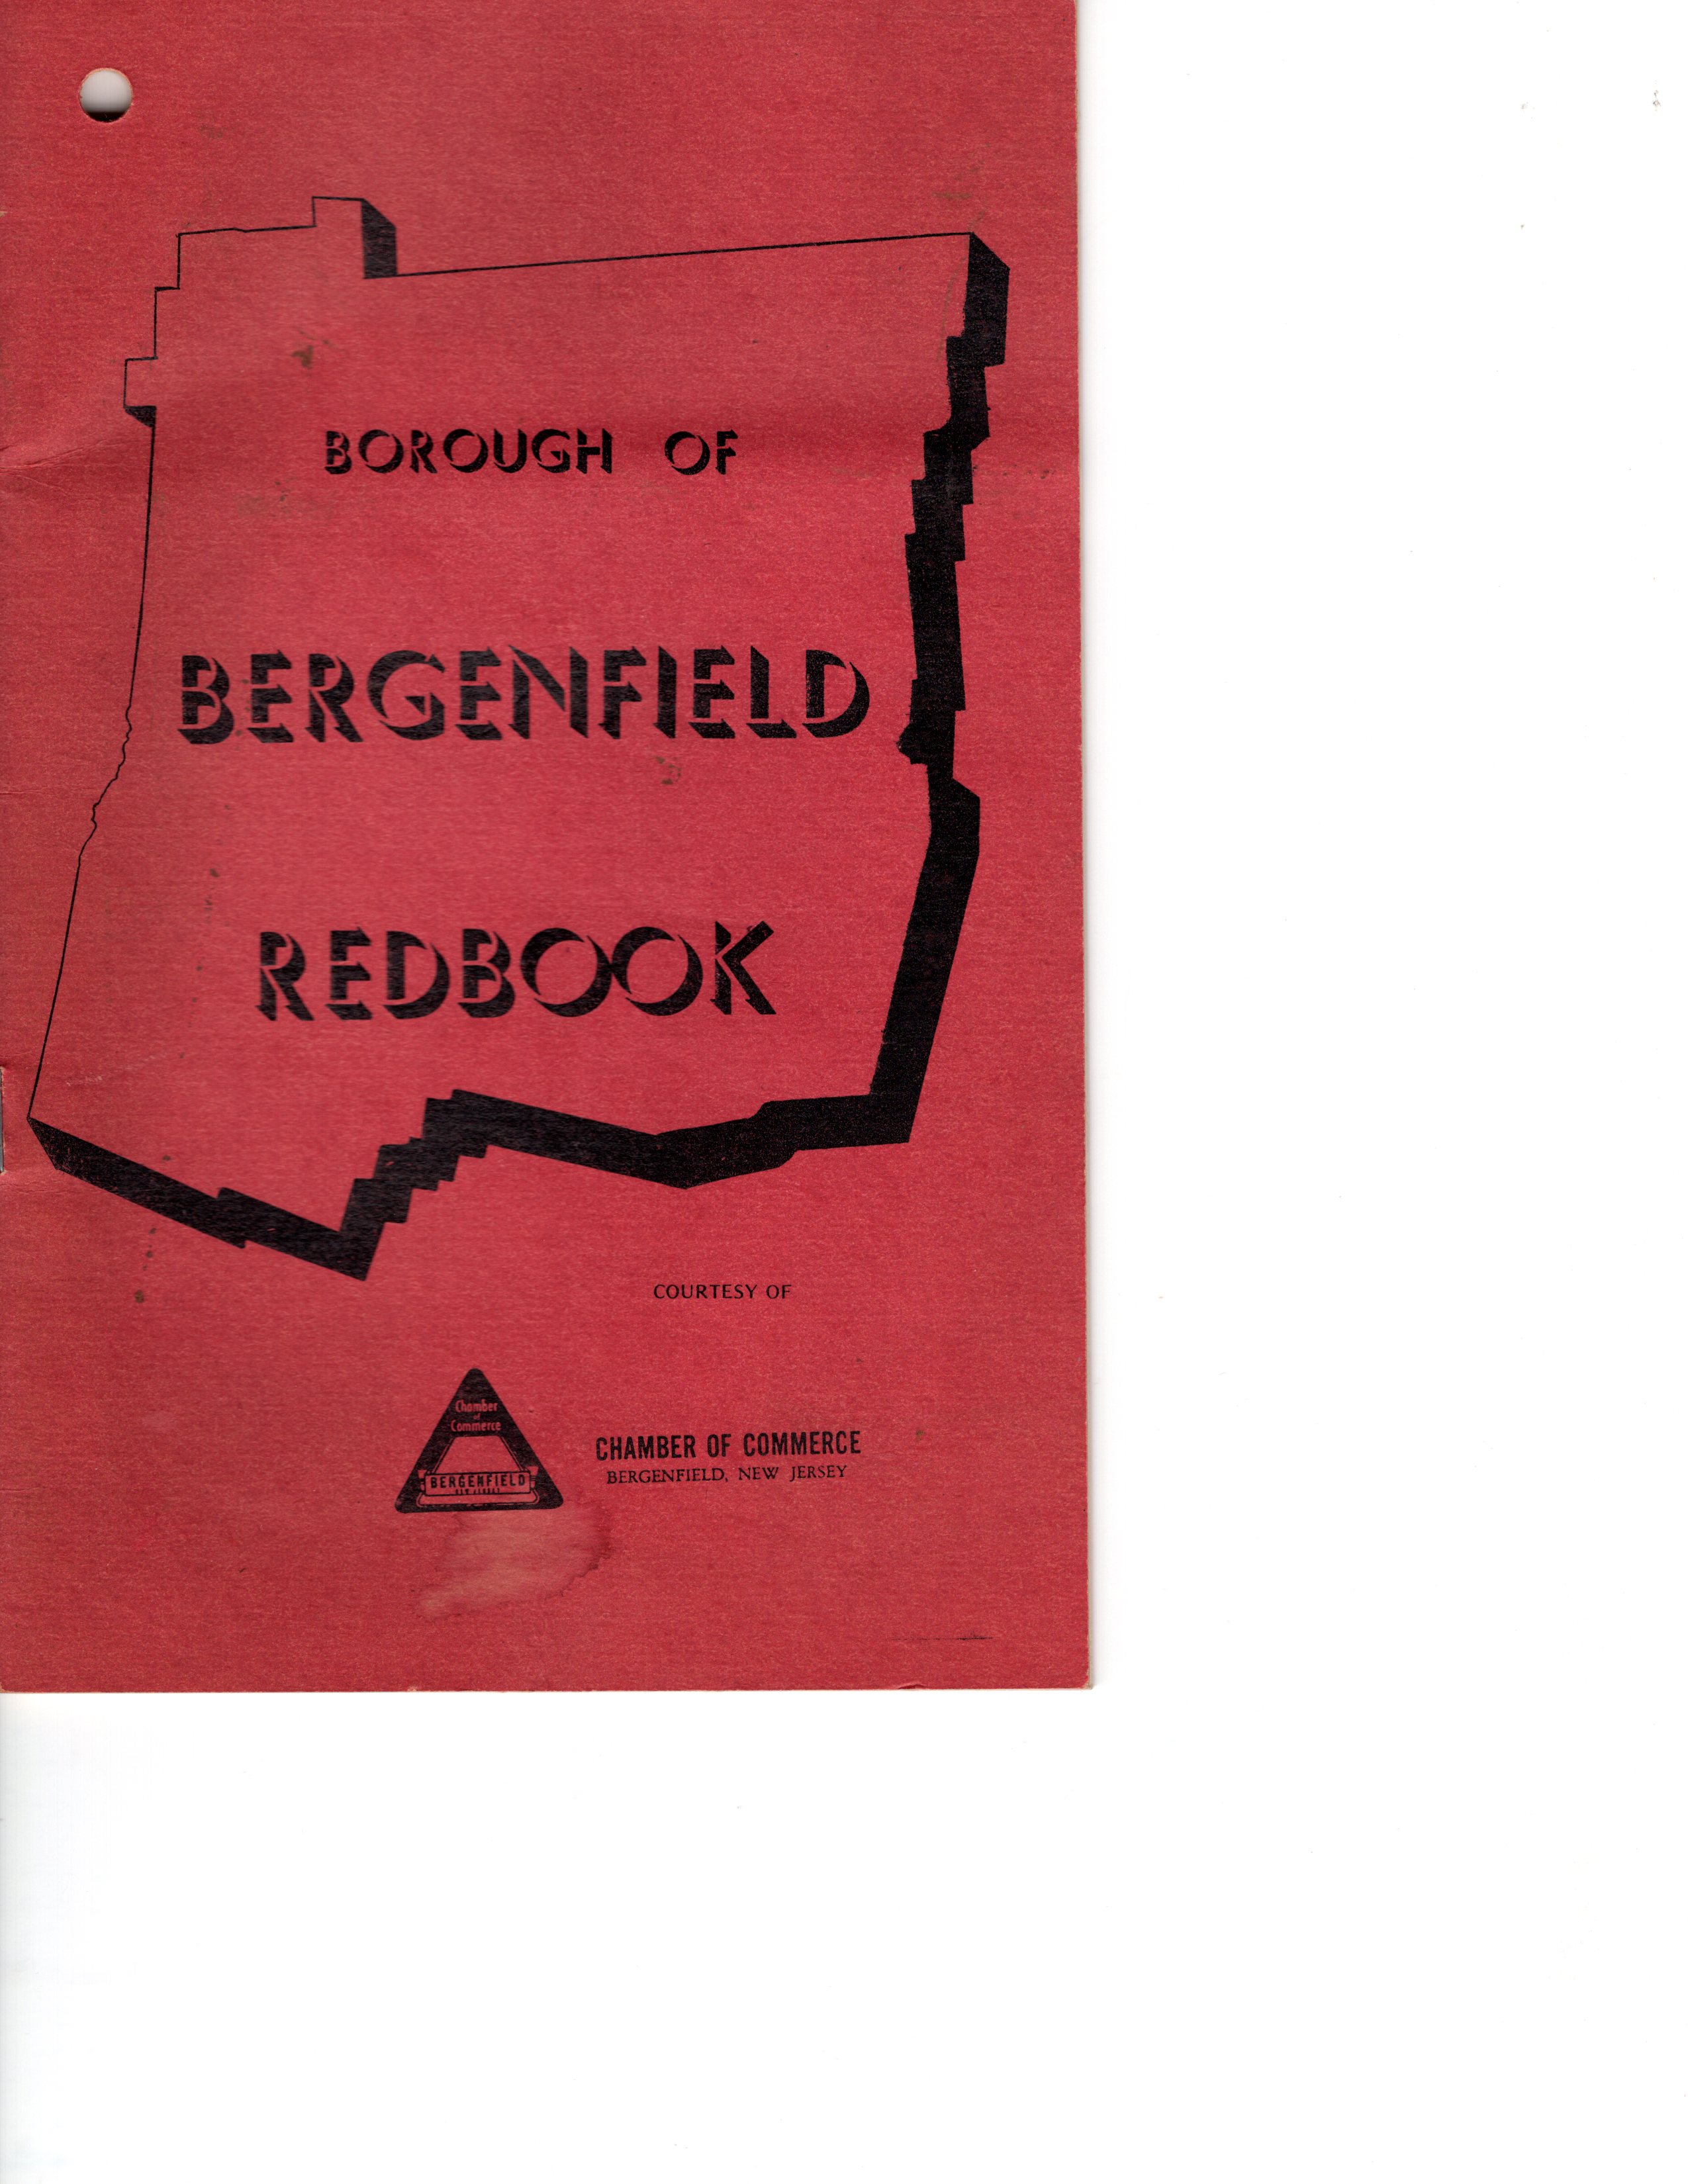 borough-of-bergenfield-redbook-courtesy-of-chamber-of-commerce